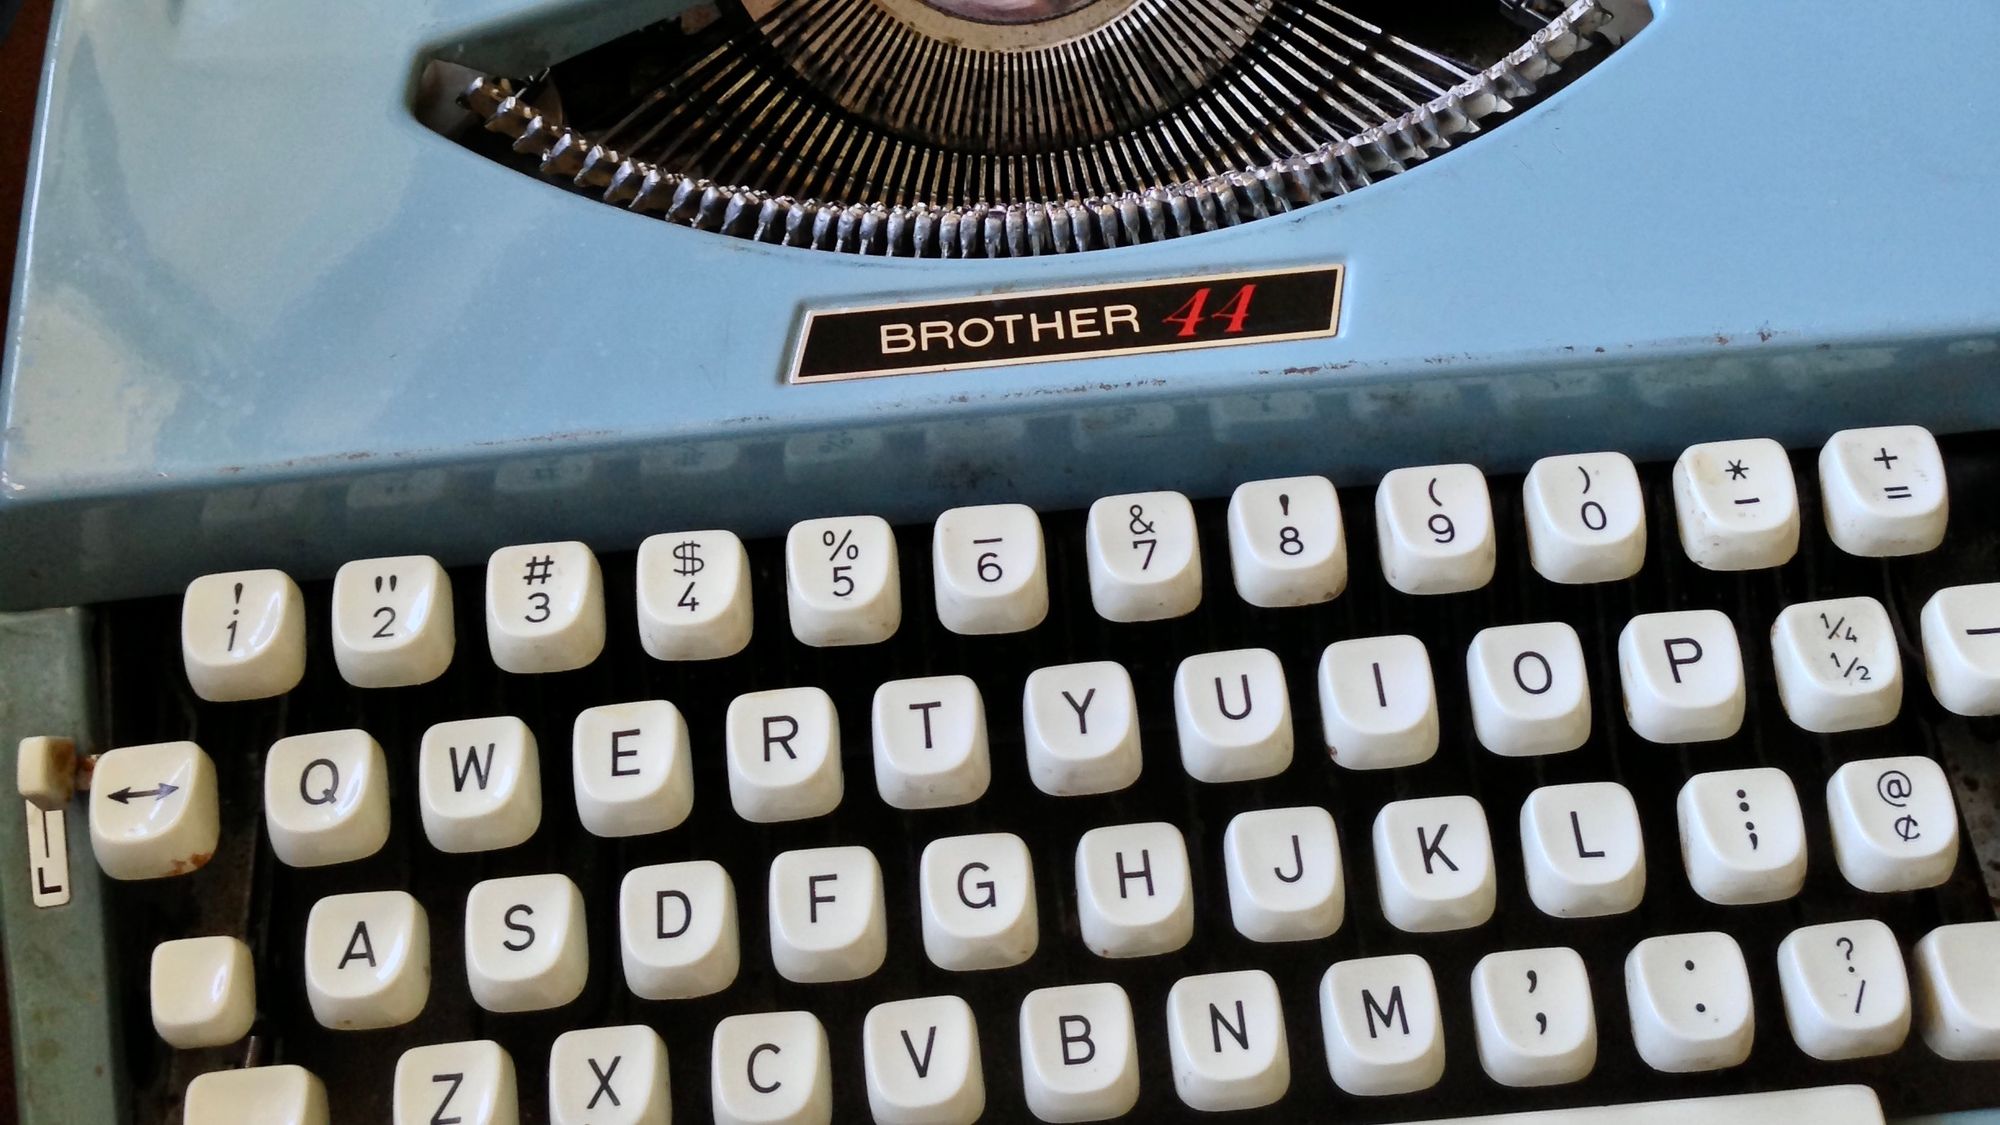 Close-up image of the keyboard on an older Brother manual typewriter